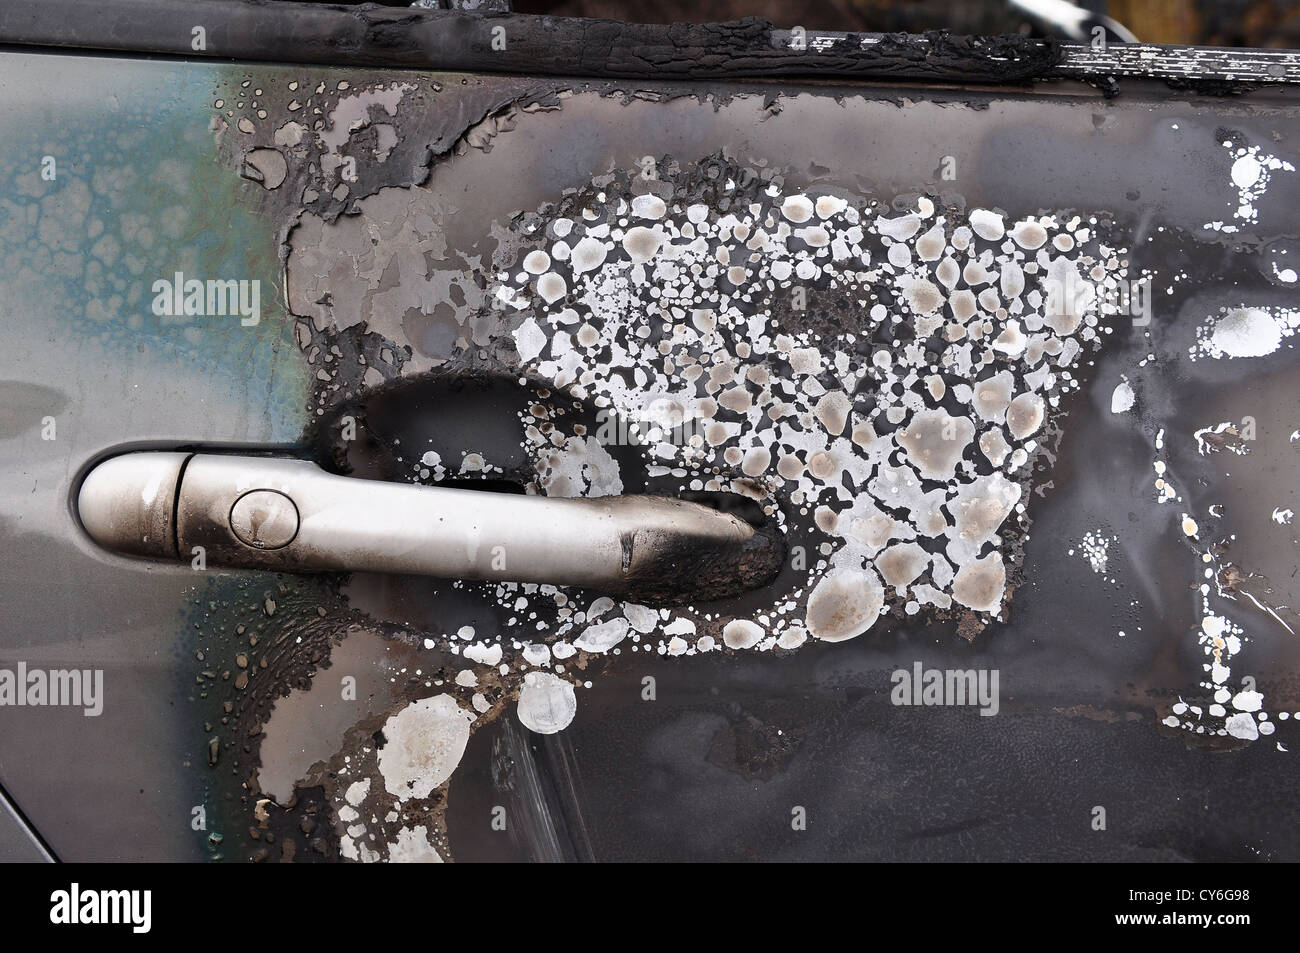 Close up detail of a burnt car in a car accident Stock Photo